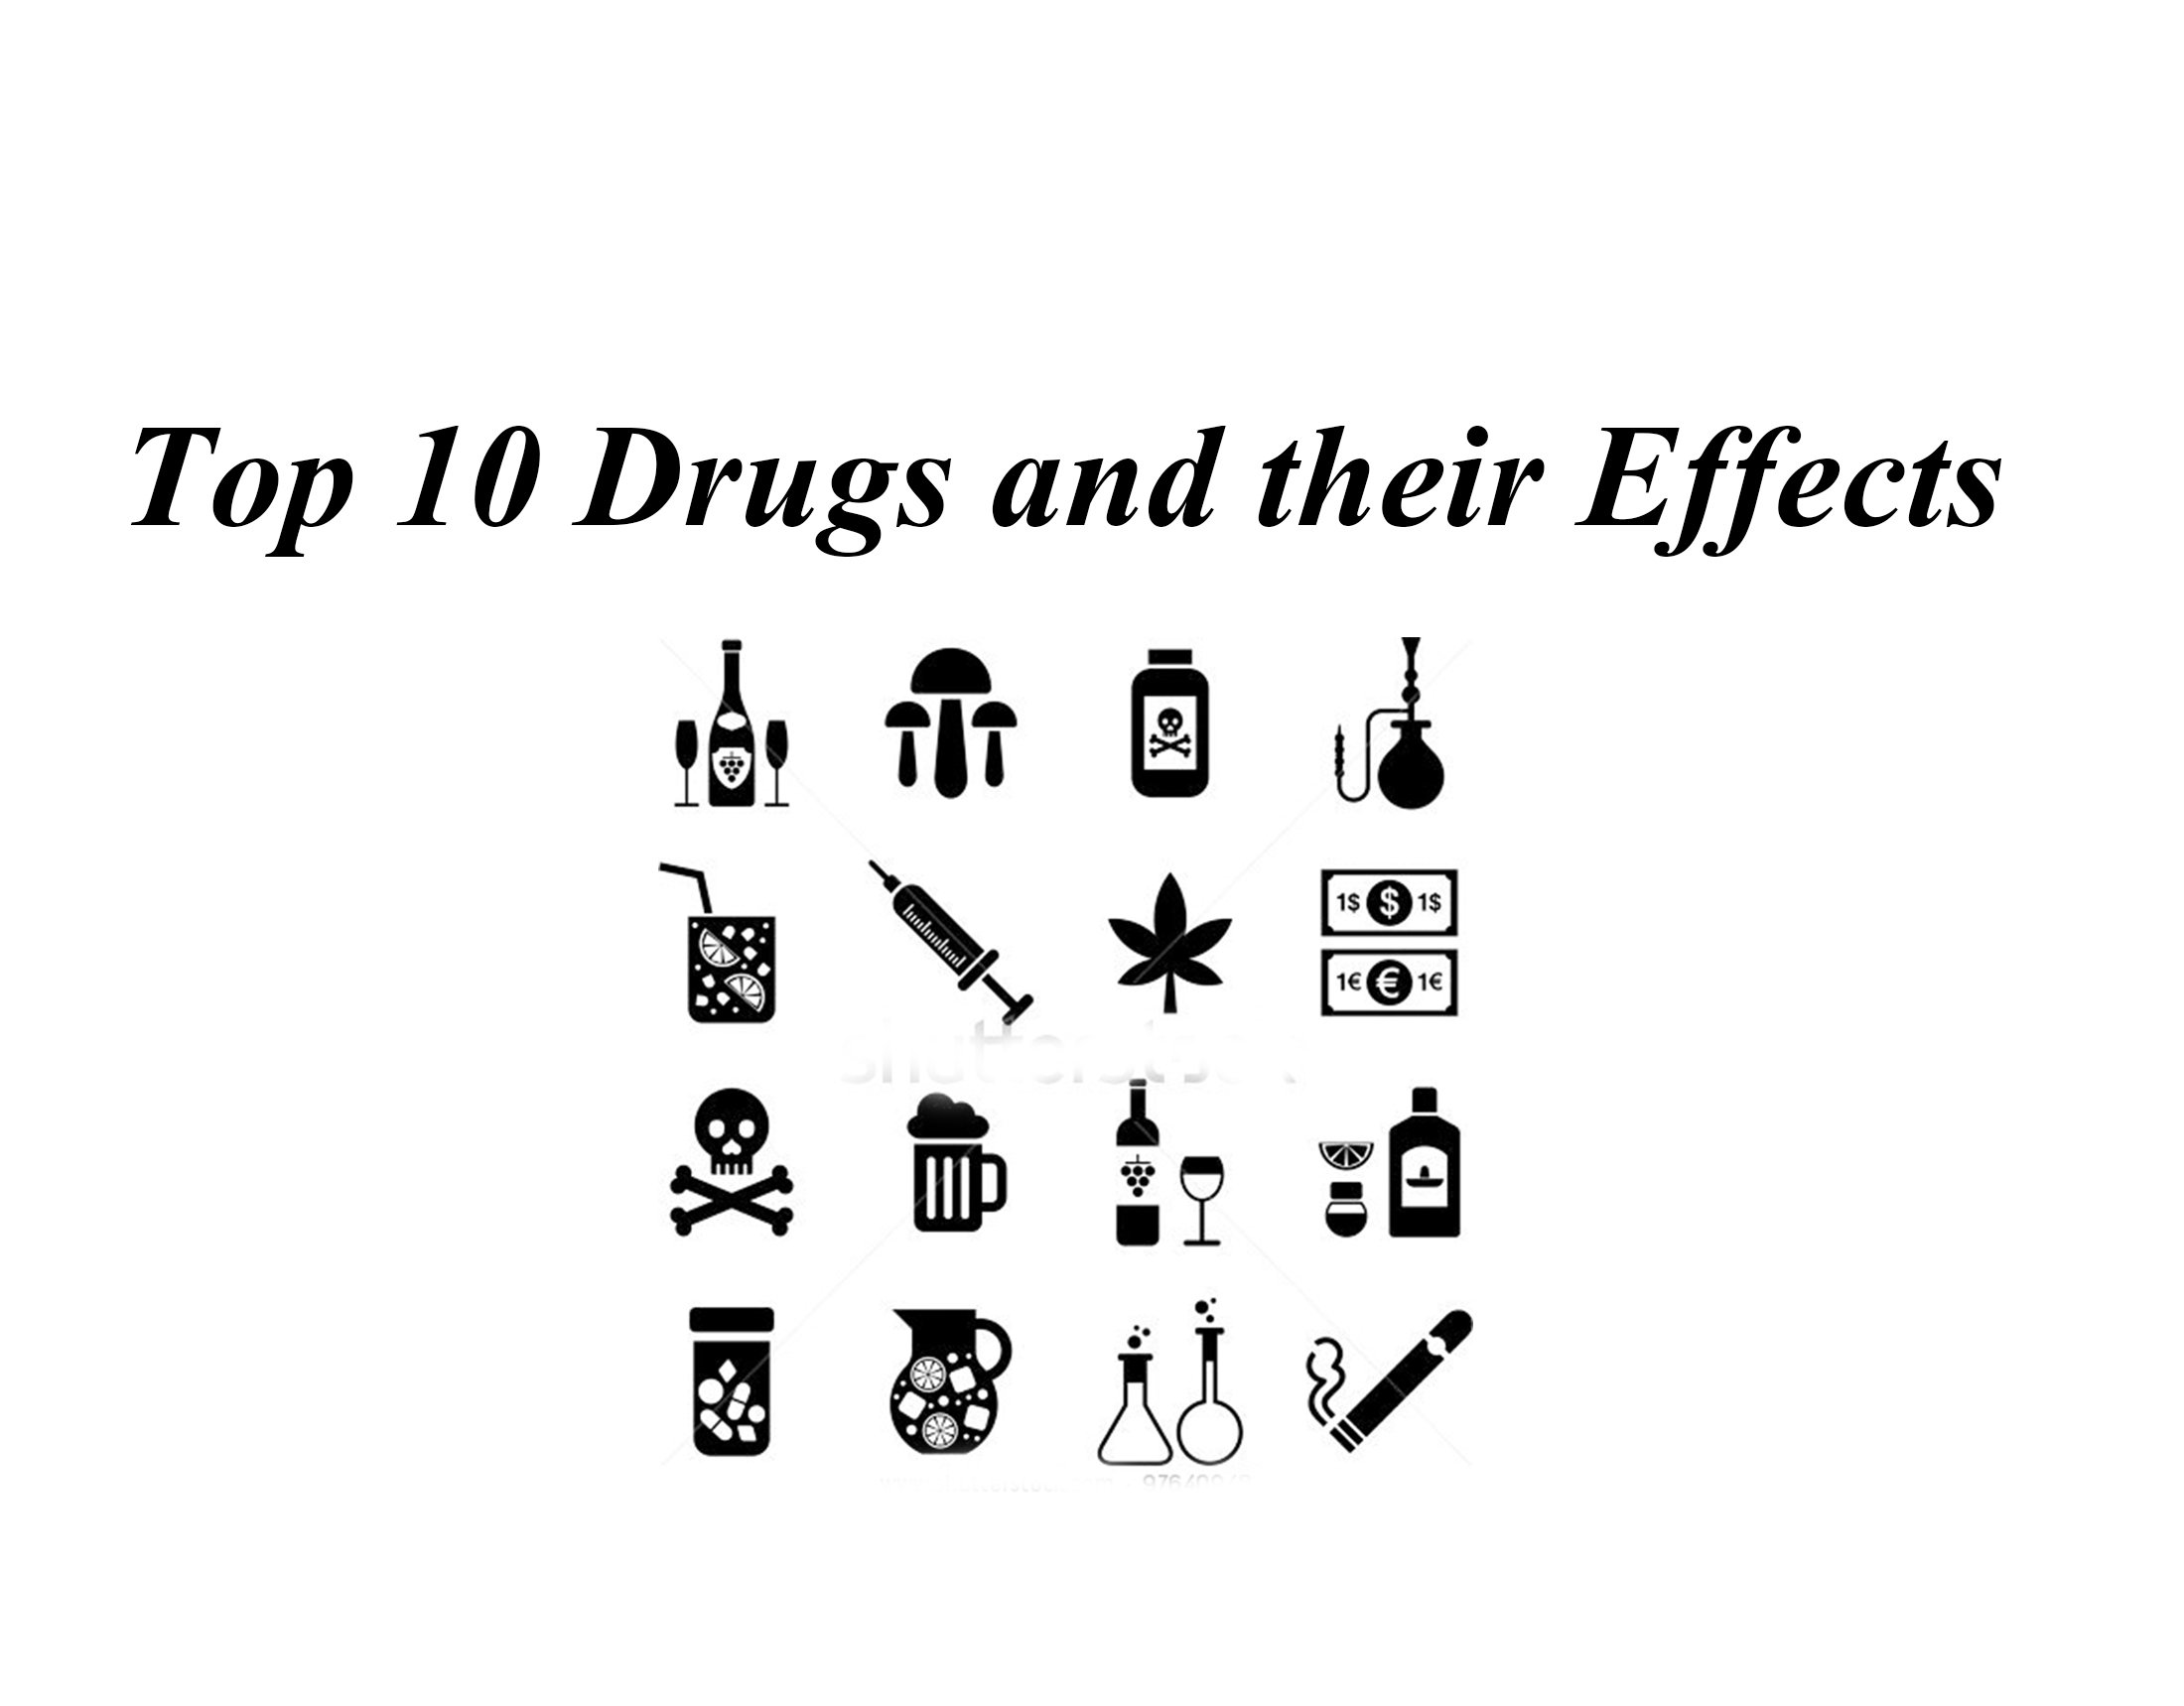 Damage and Addiction Effects of the 10 Drugs